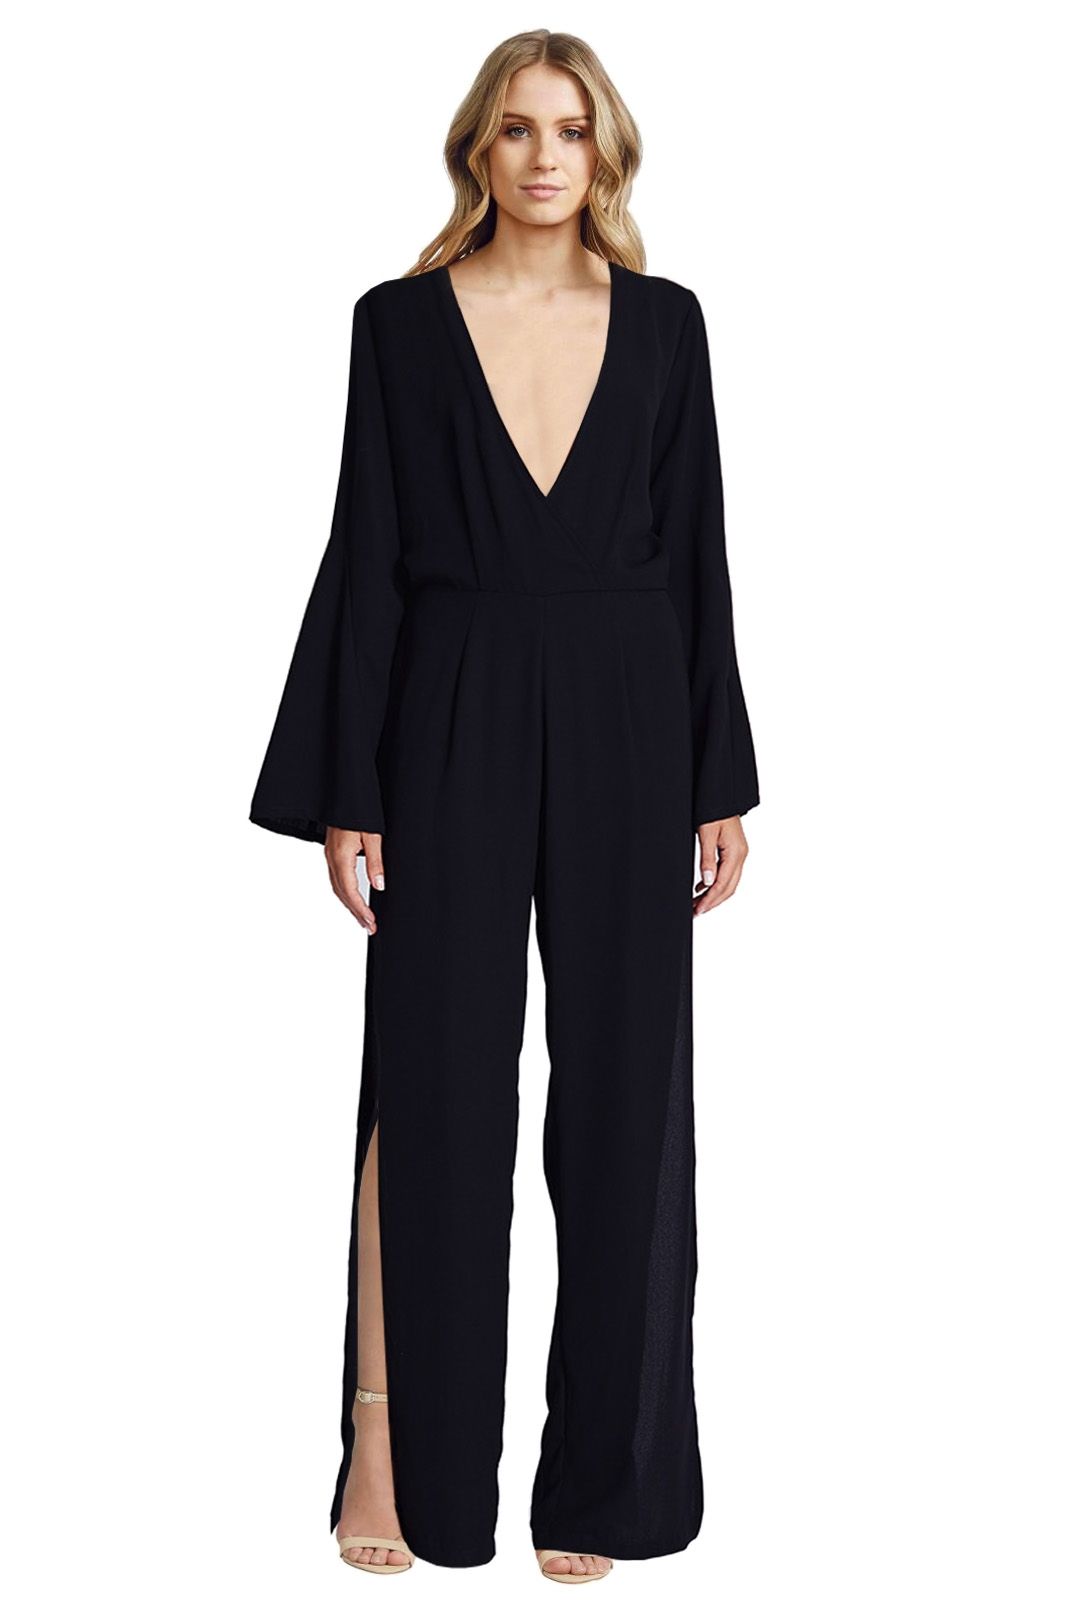 Maurie & Eve - The Runaway Jumpsuit - Black - Front